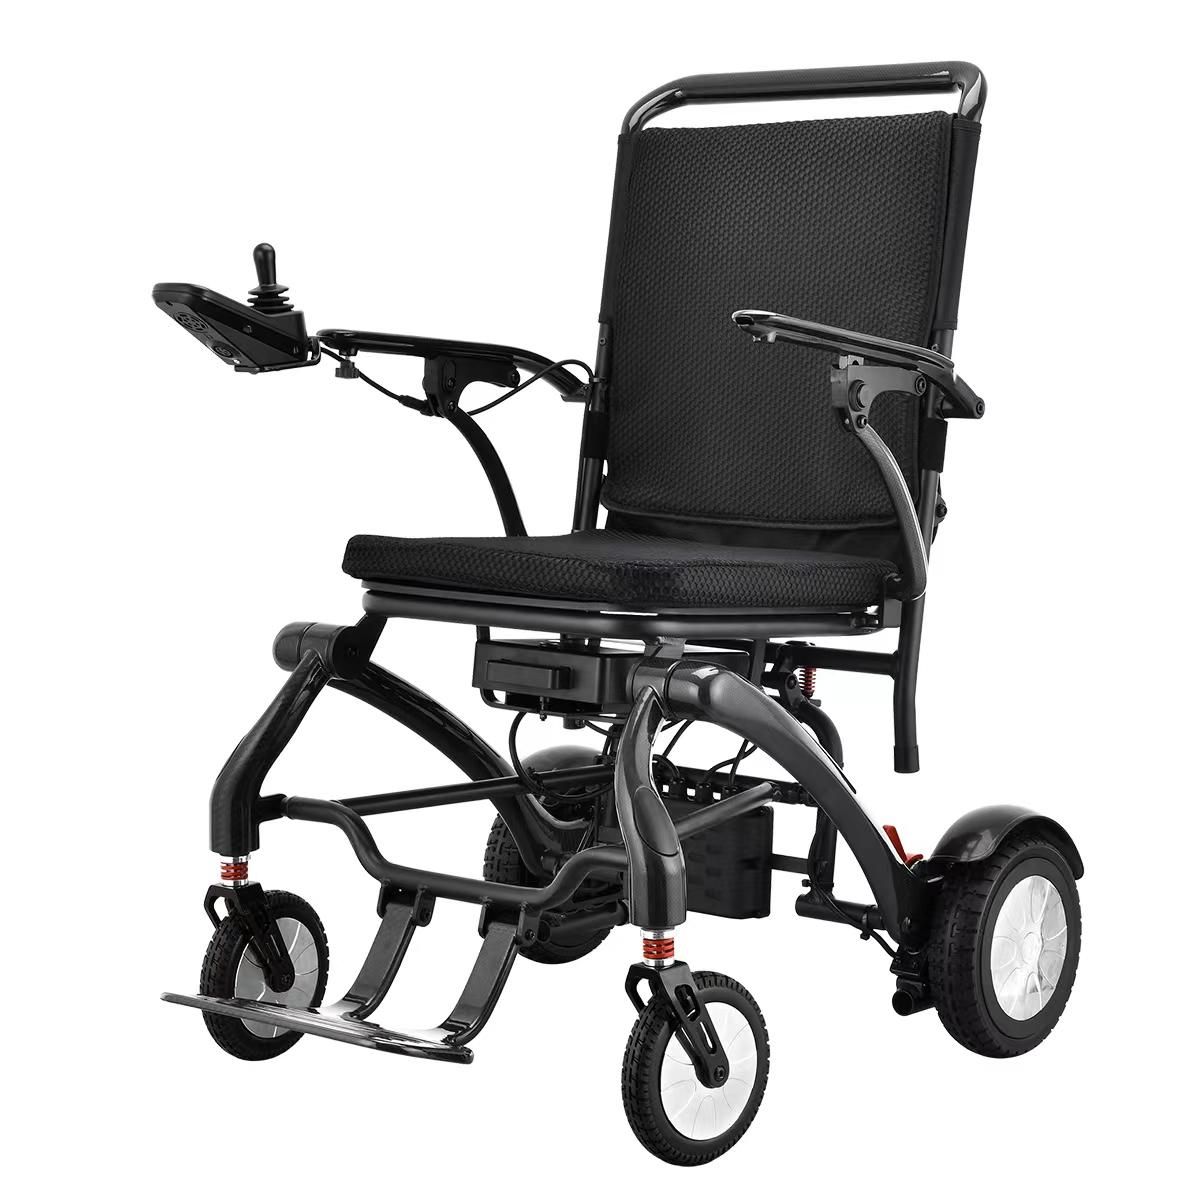 Recognizing the Basic Advantages of A Portable carbon fiber wheelchair